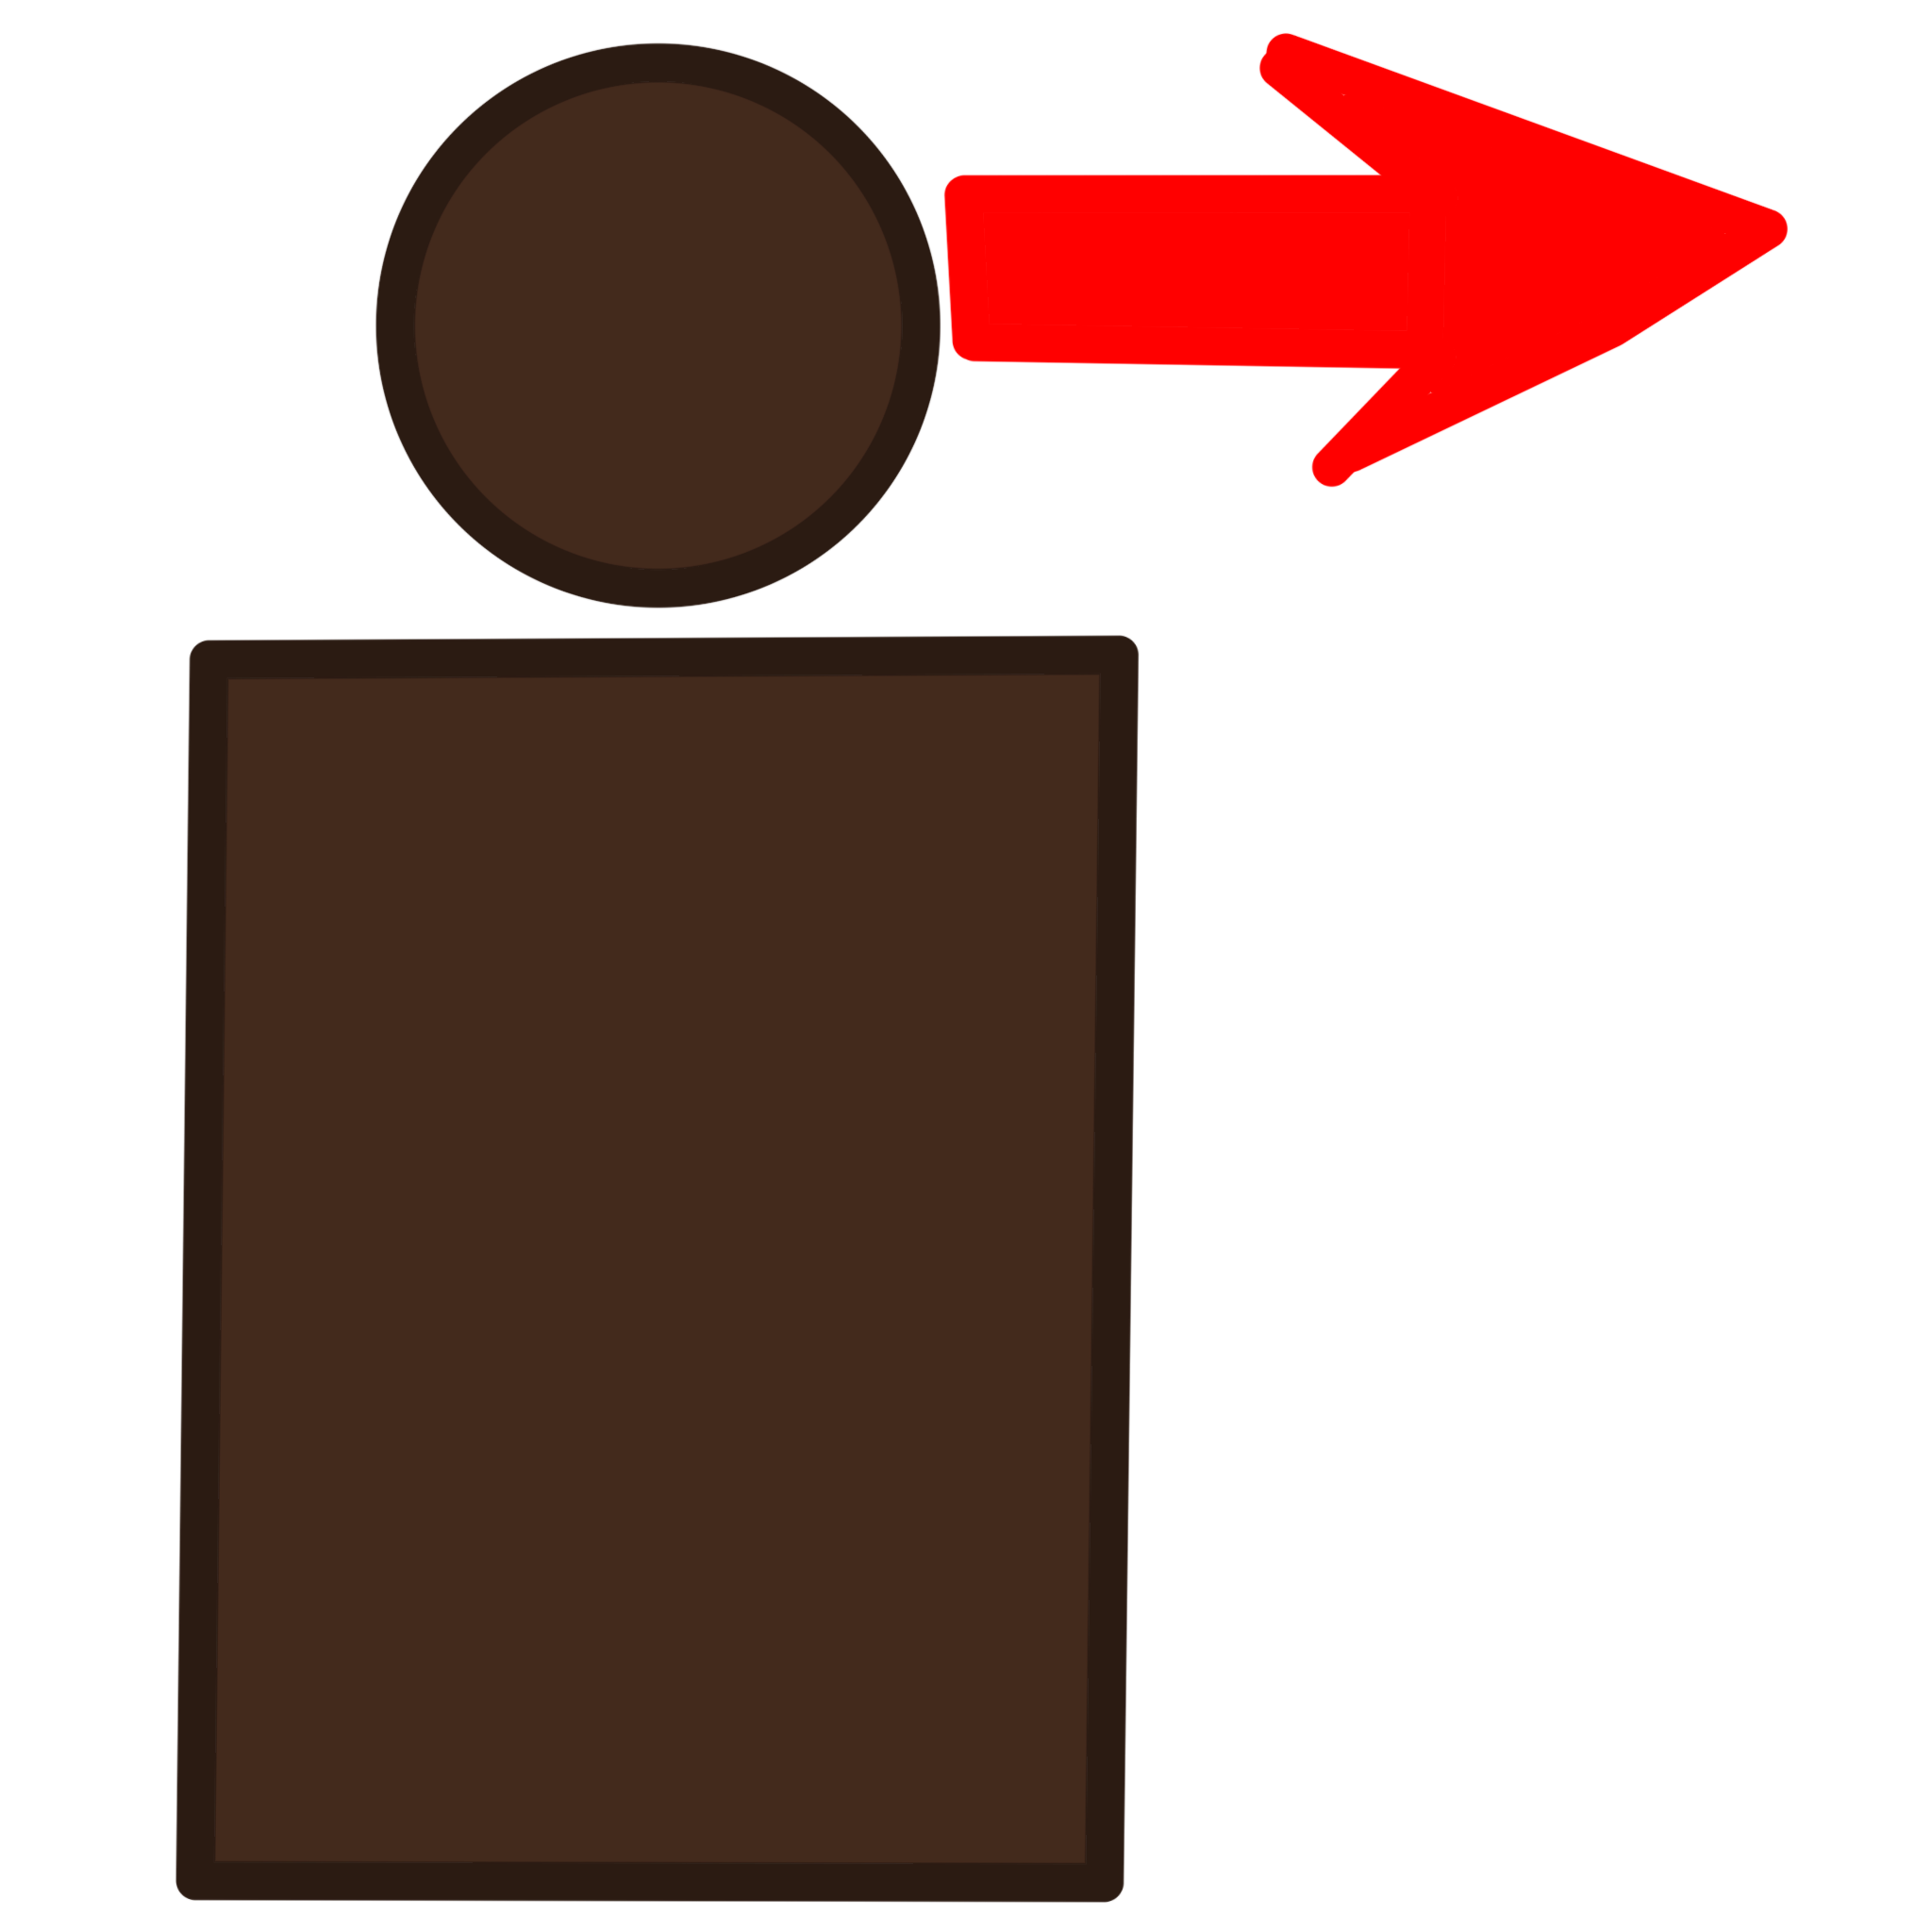 A simple drawing of a dark skinned person with a large bright red arrow point from their head at eye level.